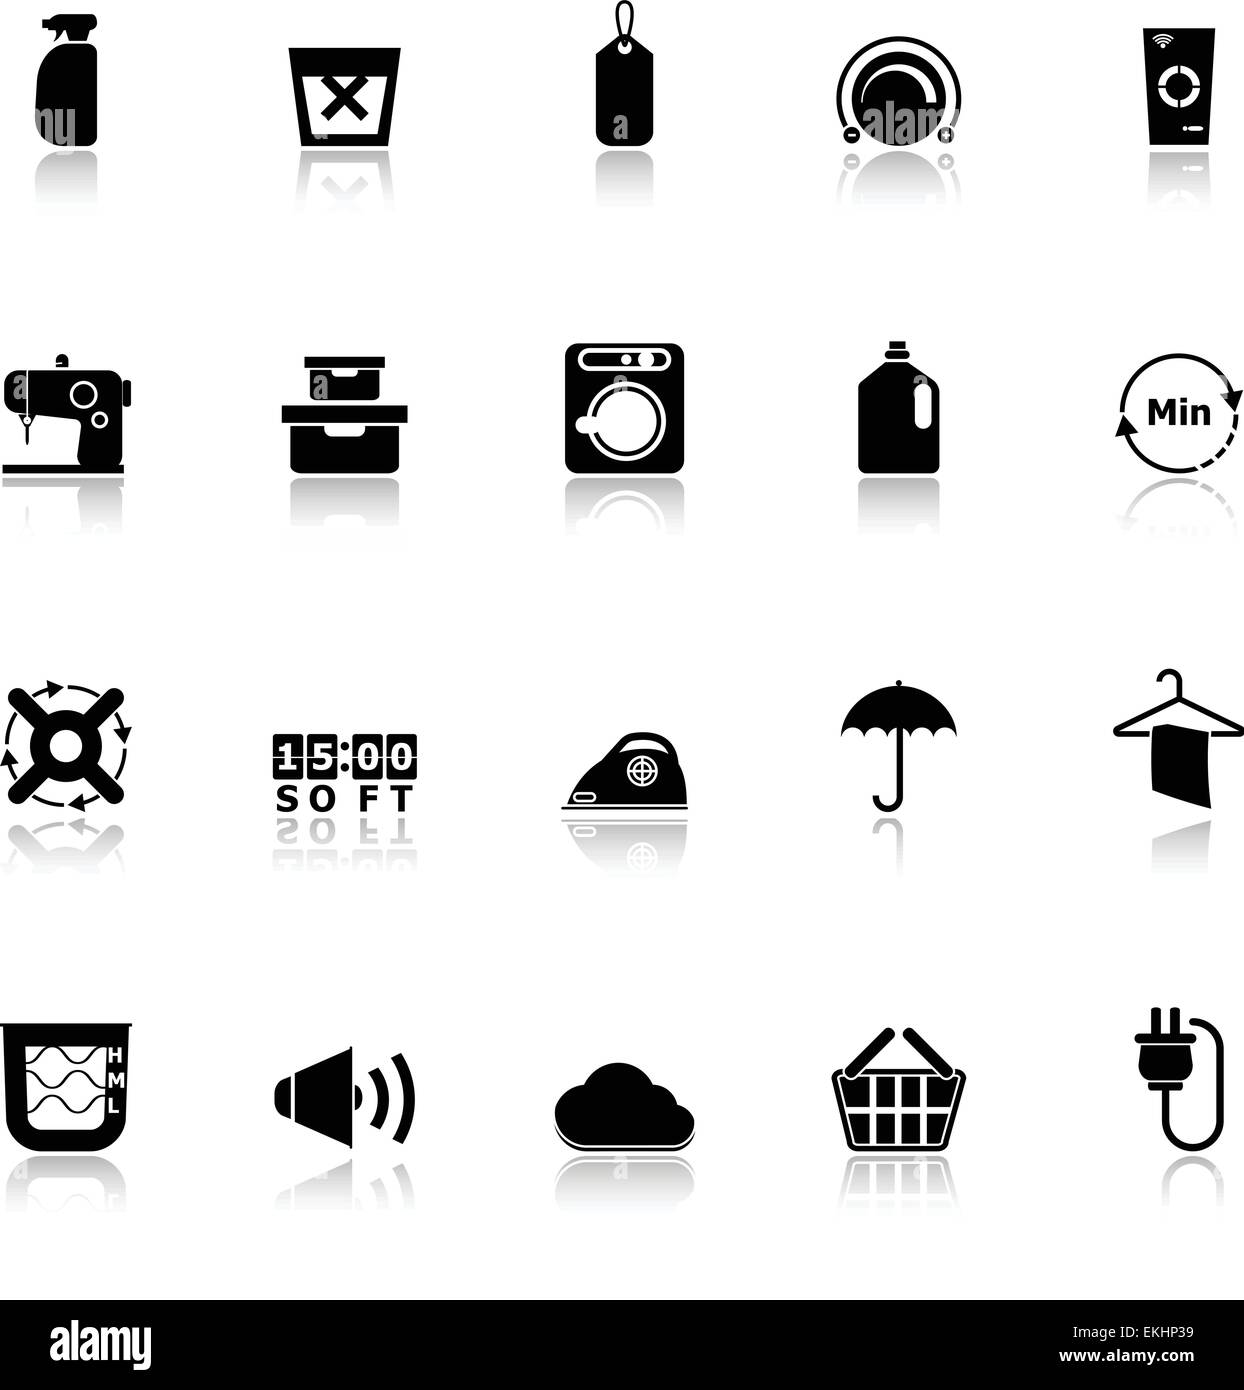 Laundry icons with reflect on white background, stock vector Stock Vector